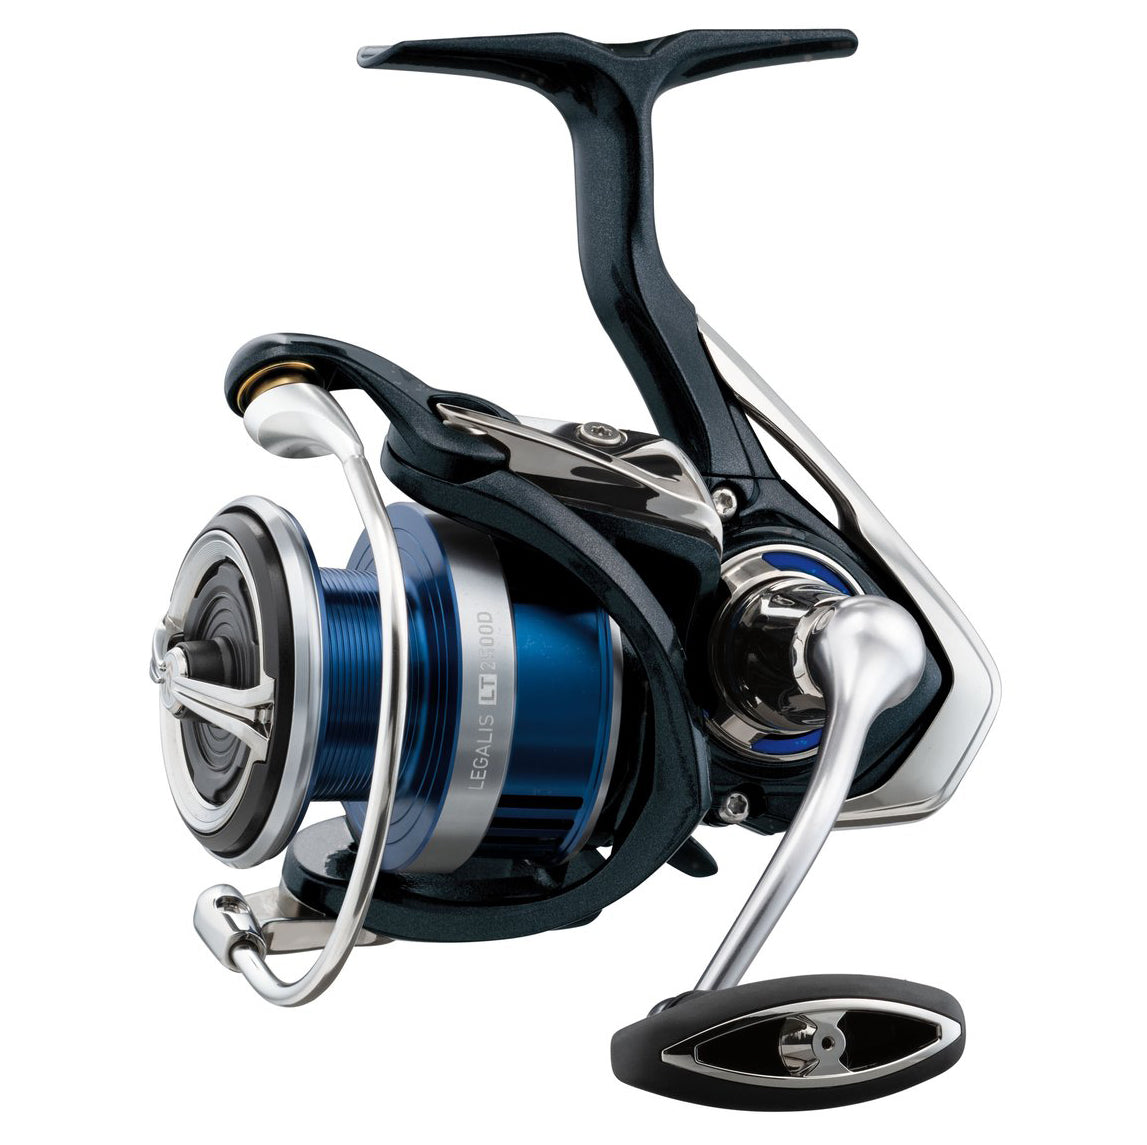 DAIWA LEGALIS LT 1000D,2500D, 6000D Spinning Reel with One Year